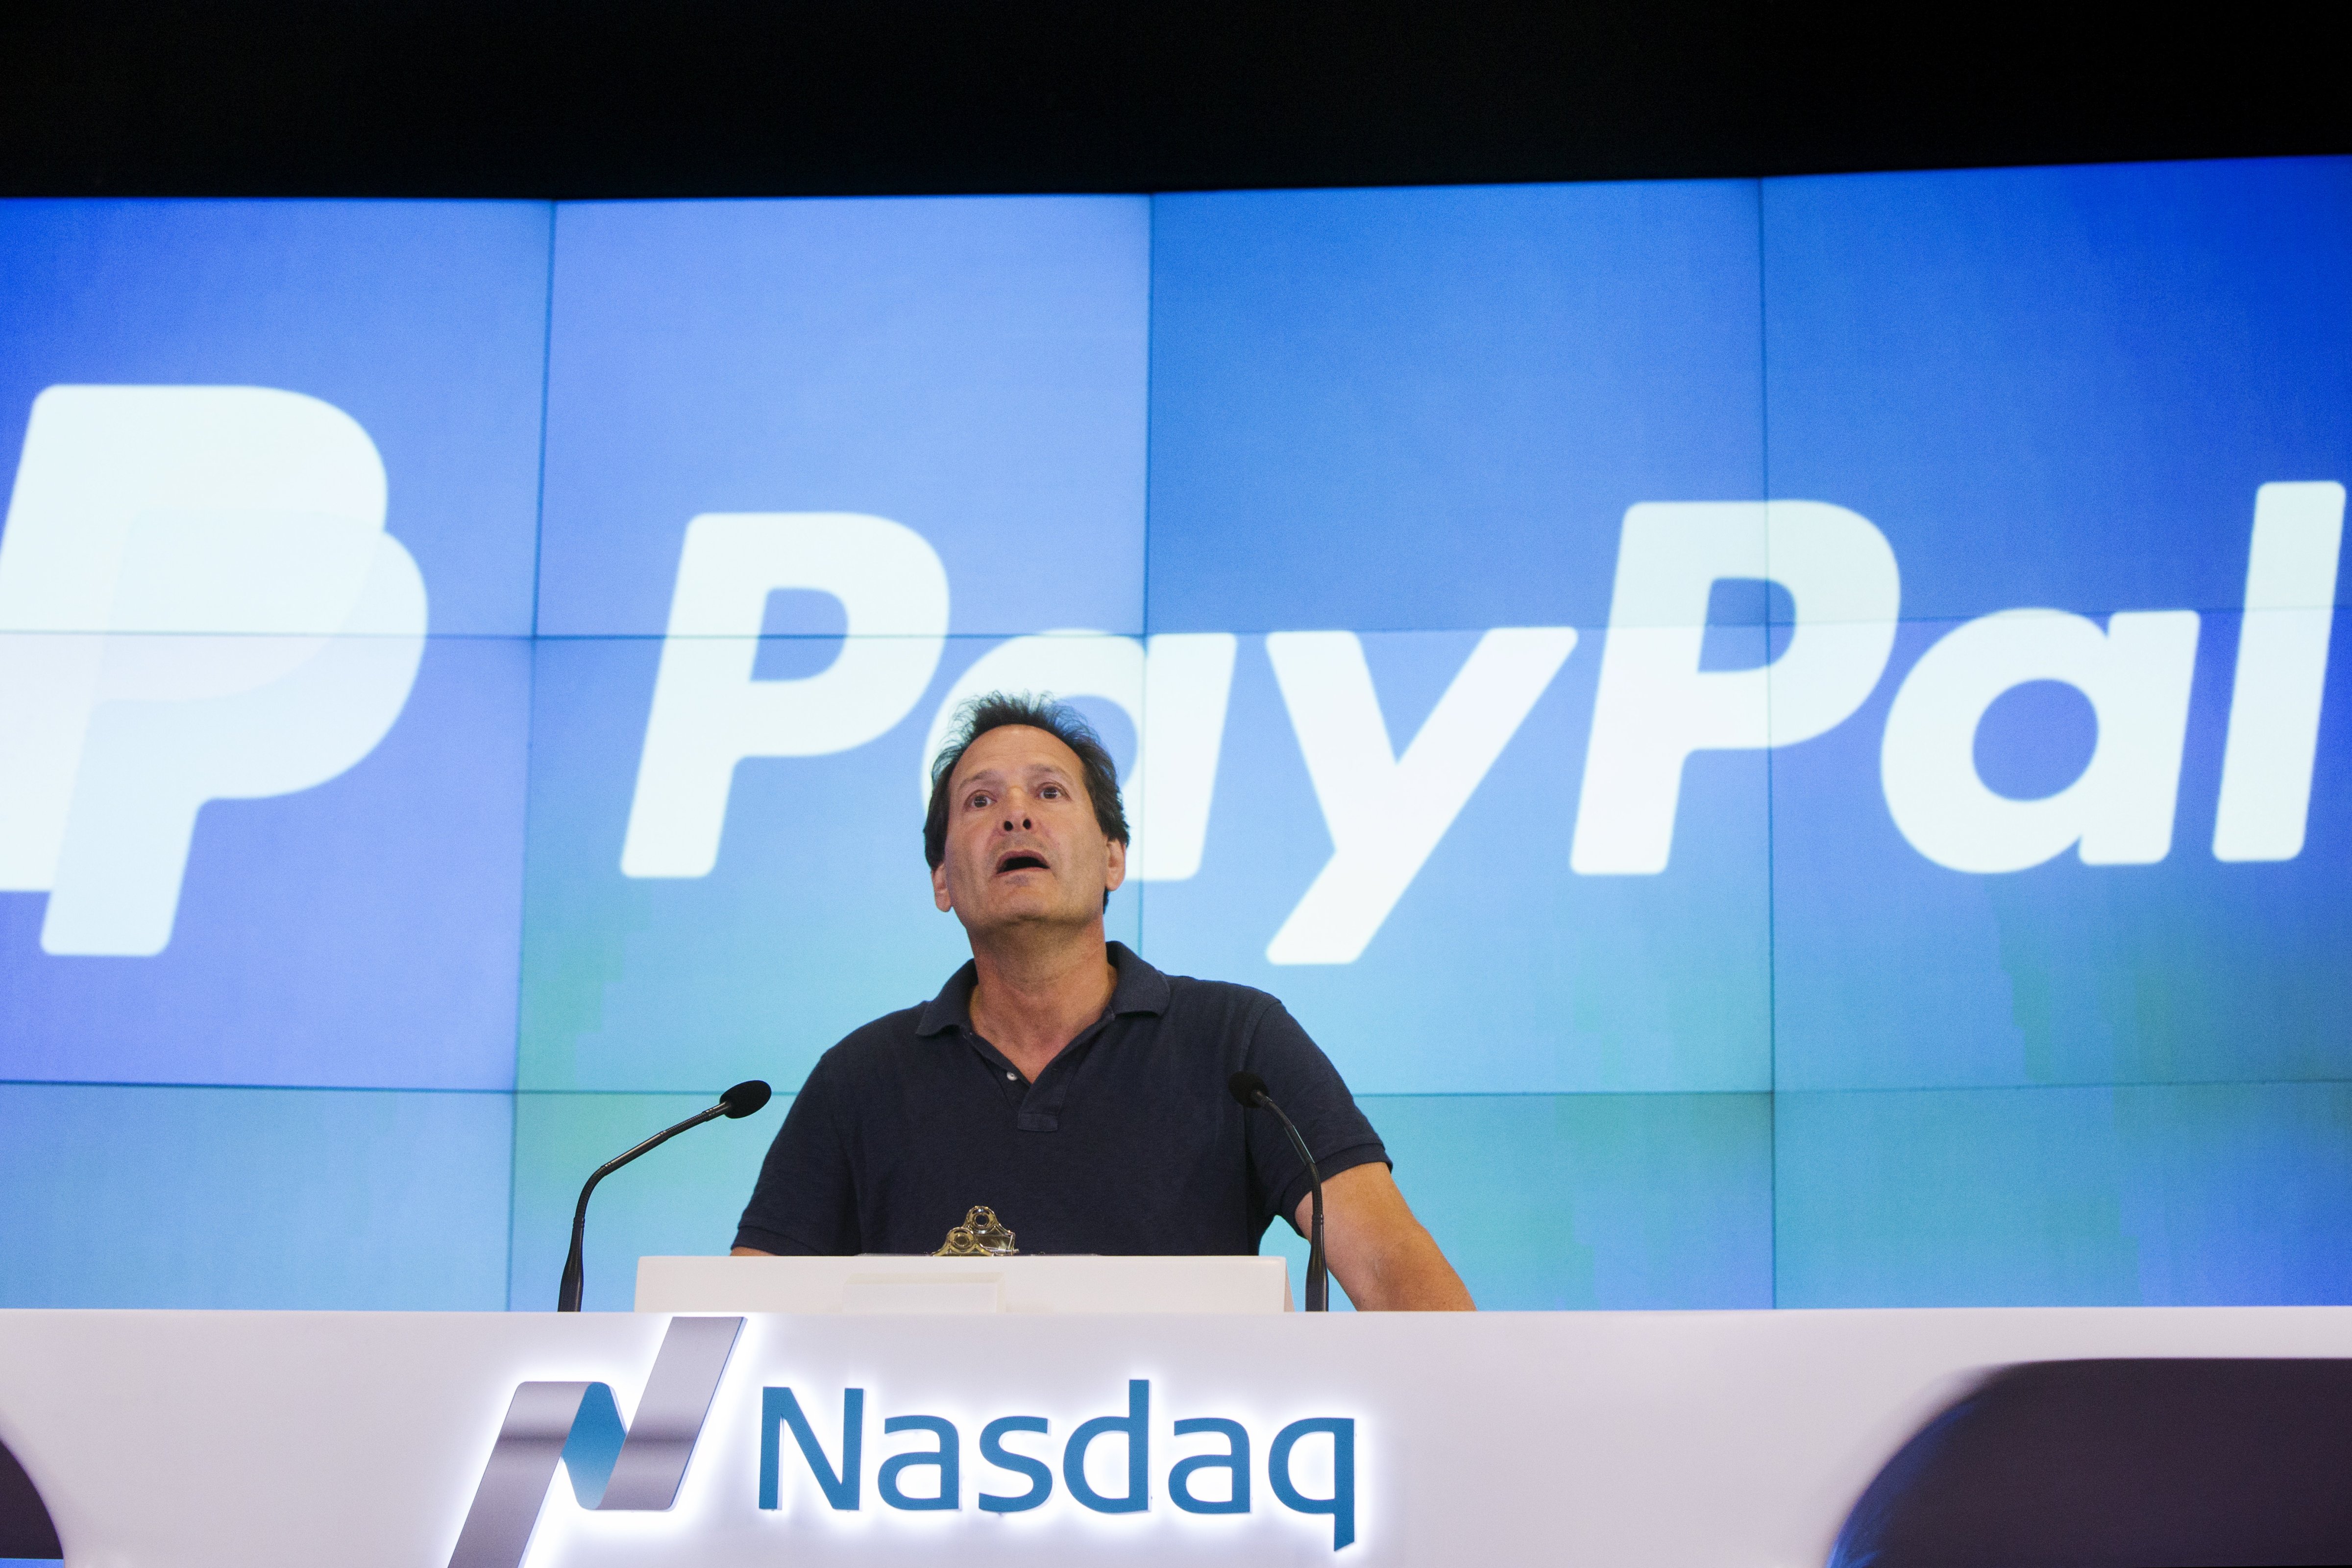 Paypal CEO Dan Schulman takes part in the company's relisting on the Nasdaq in New York, July 20, 2015 (Lucas Jackson—Reuters)